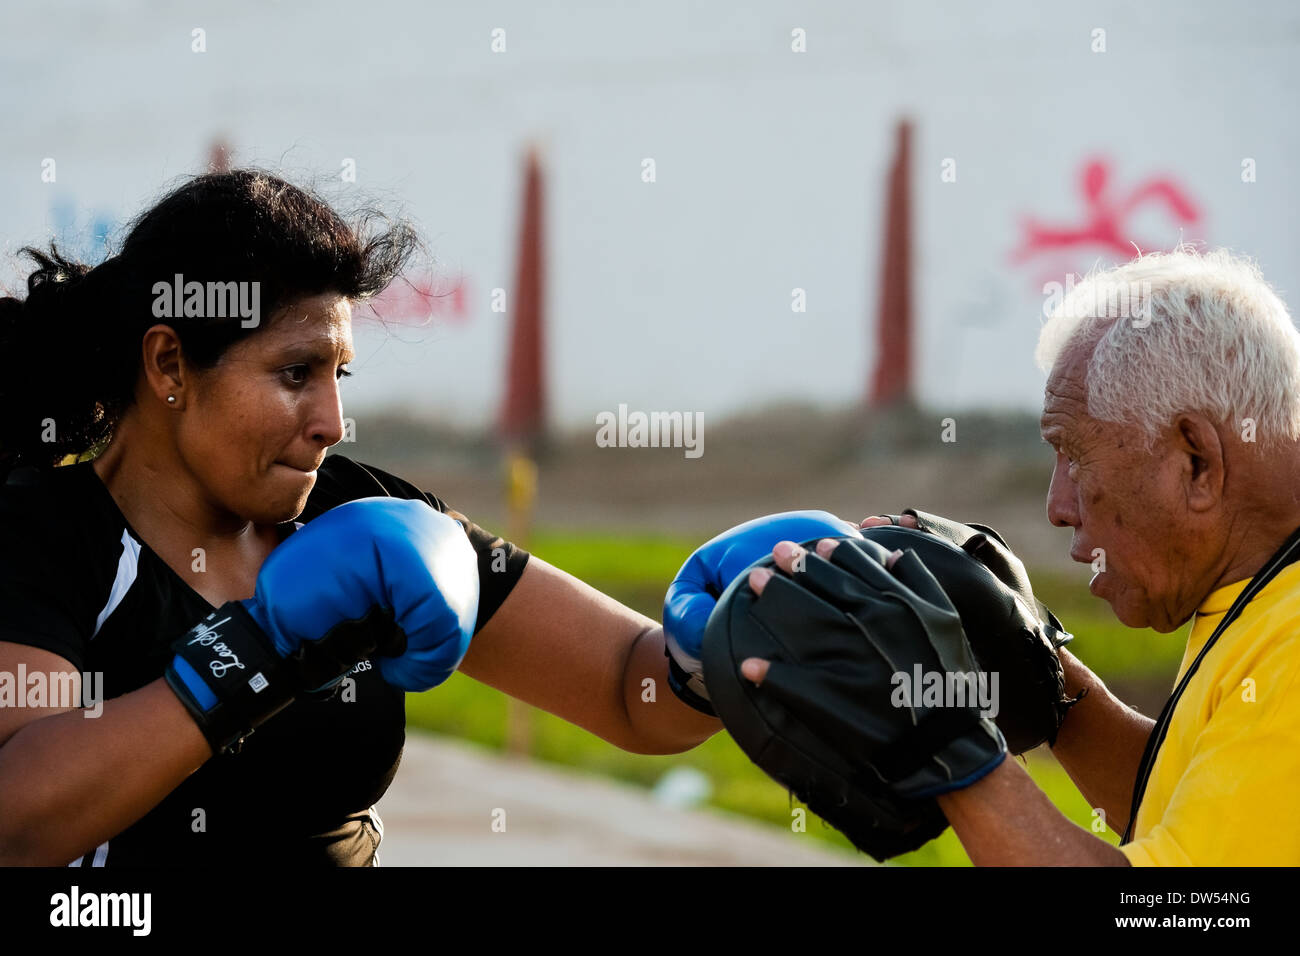 A Peruvian woman practices sparring with her coach in the outdoor boxing school in Callao, Peru. Stock Photo